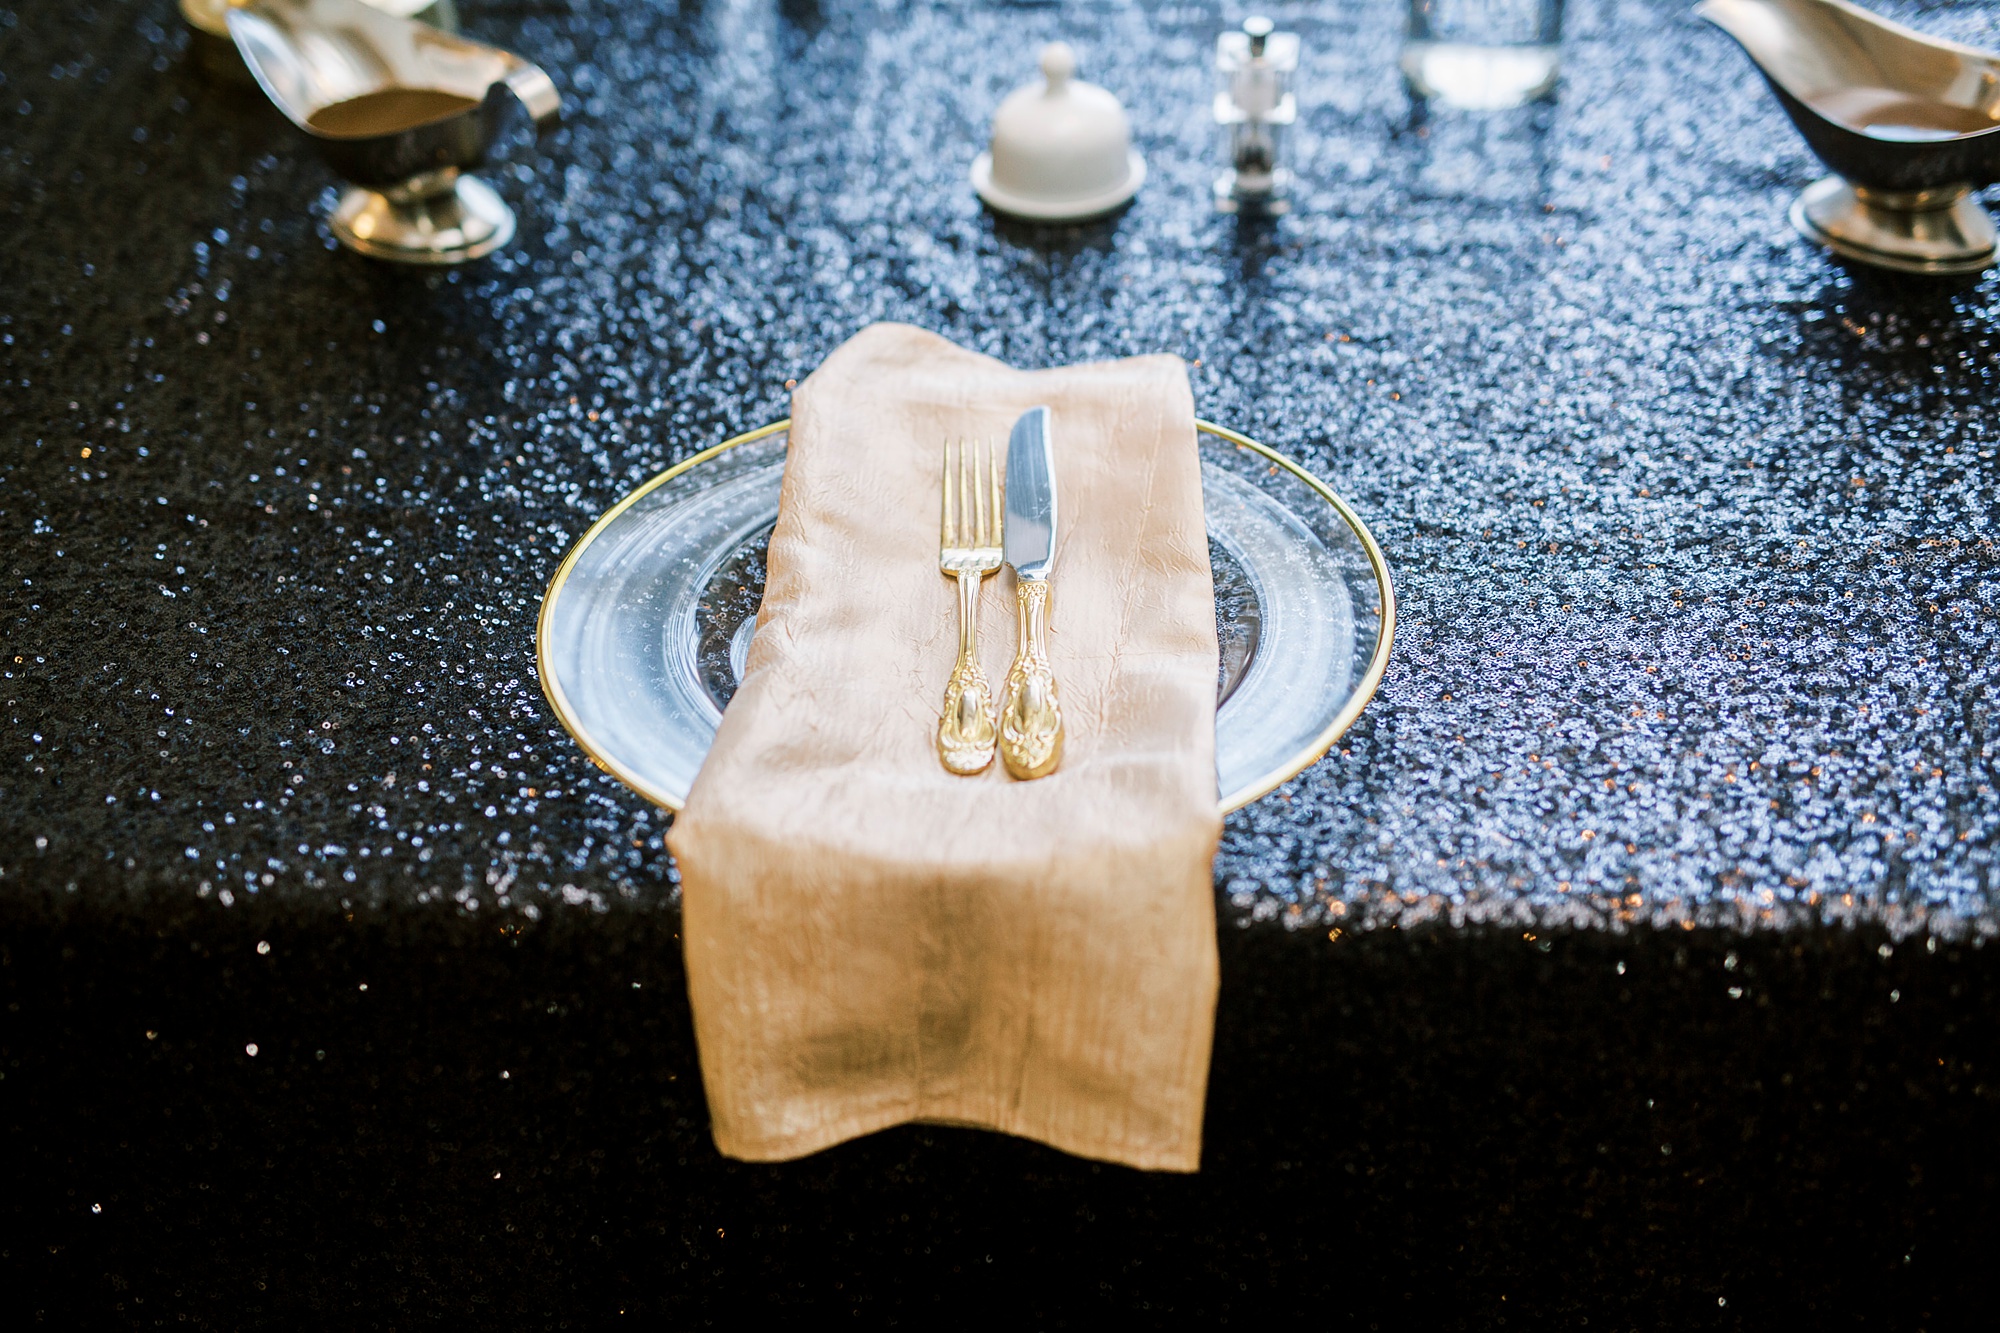 black and gold place settings for Great Gatsby birthday party